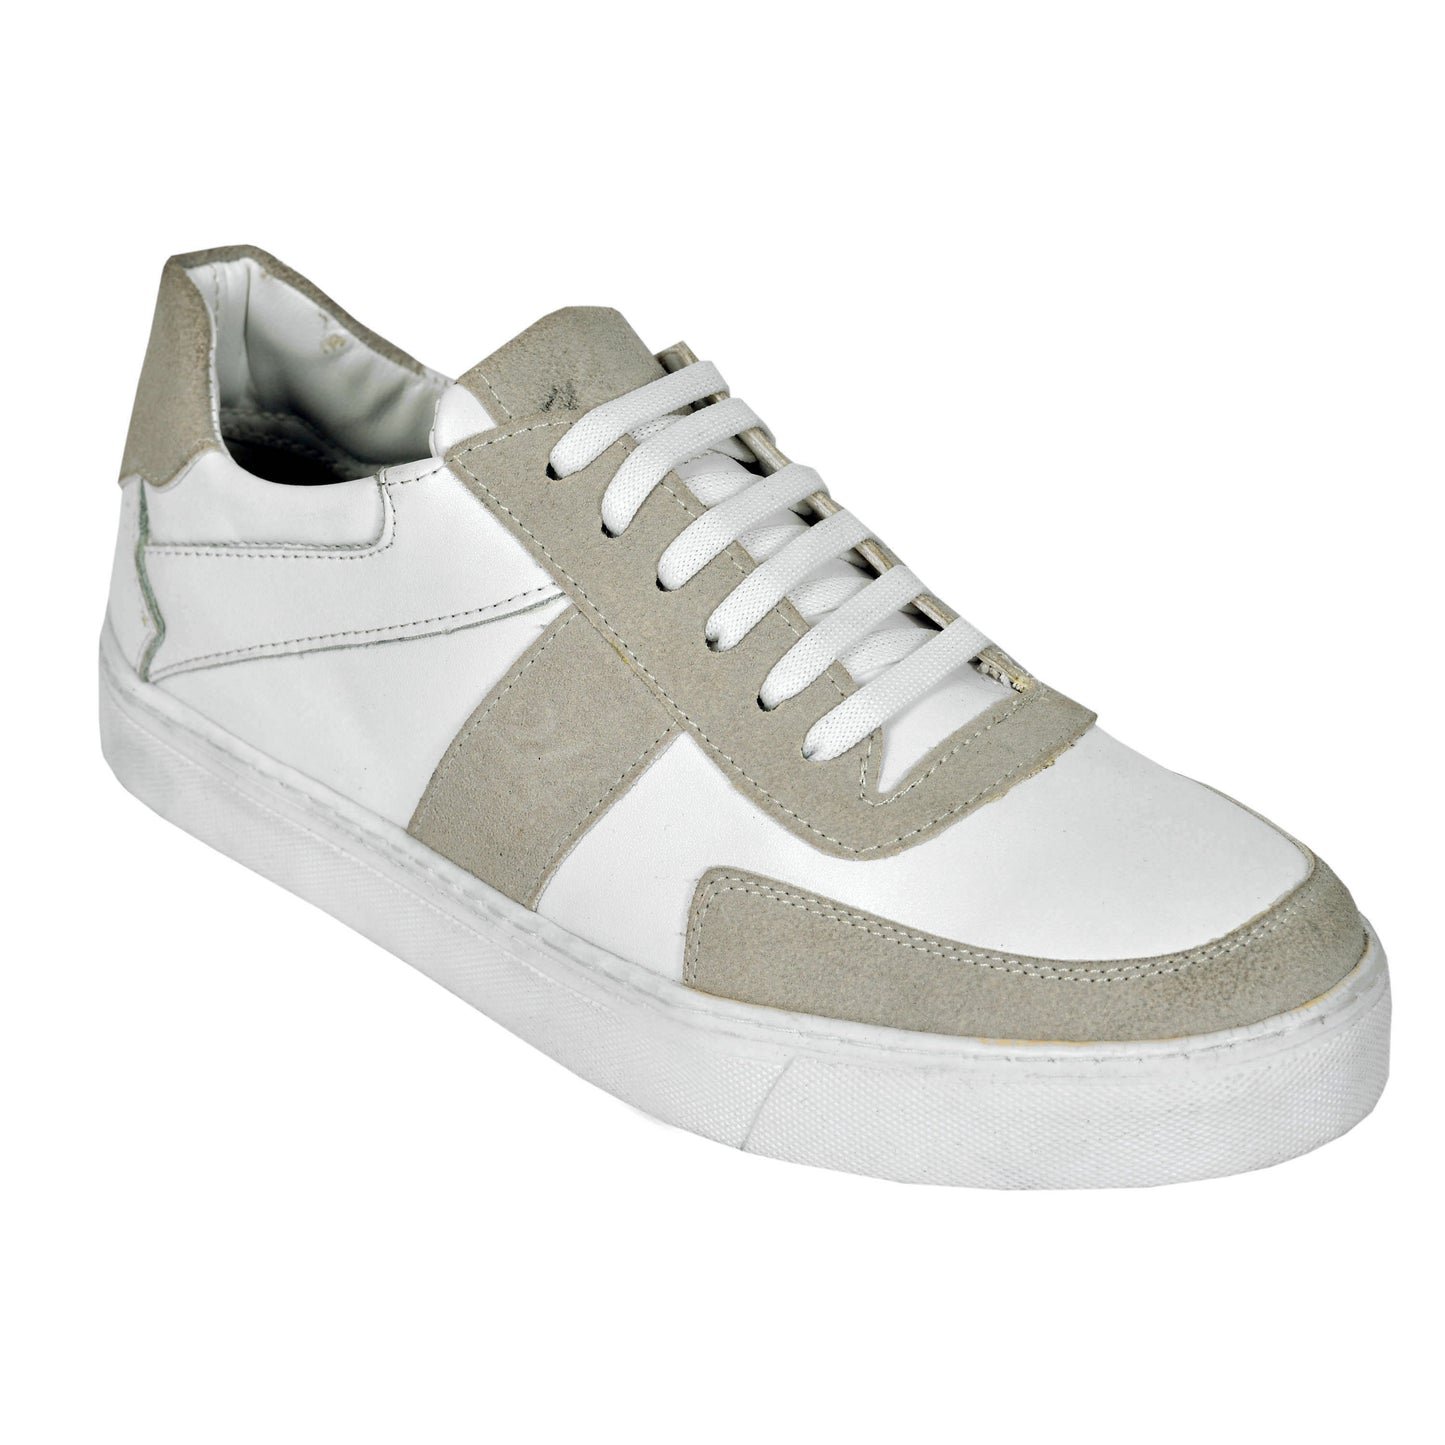 SALE! 2H #7003 White/Gray Casual Shoes